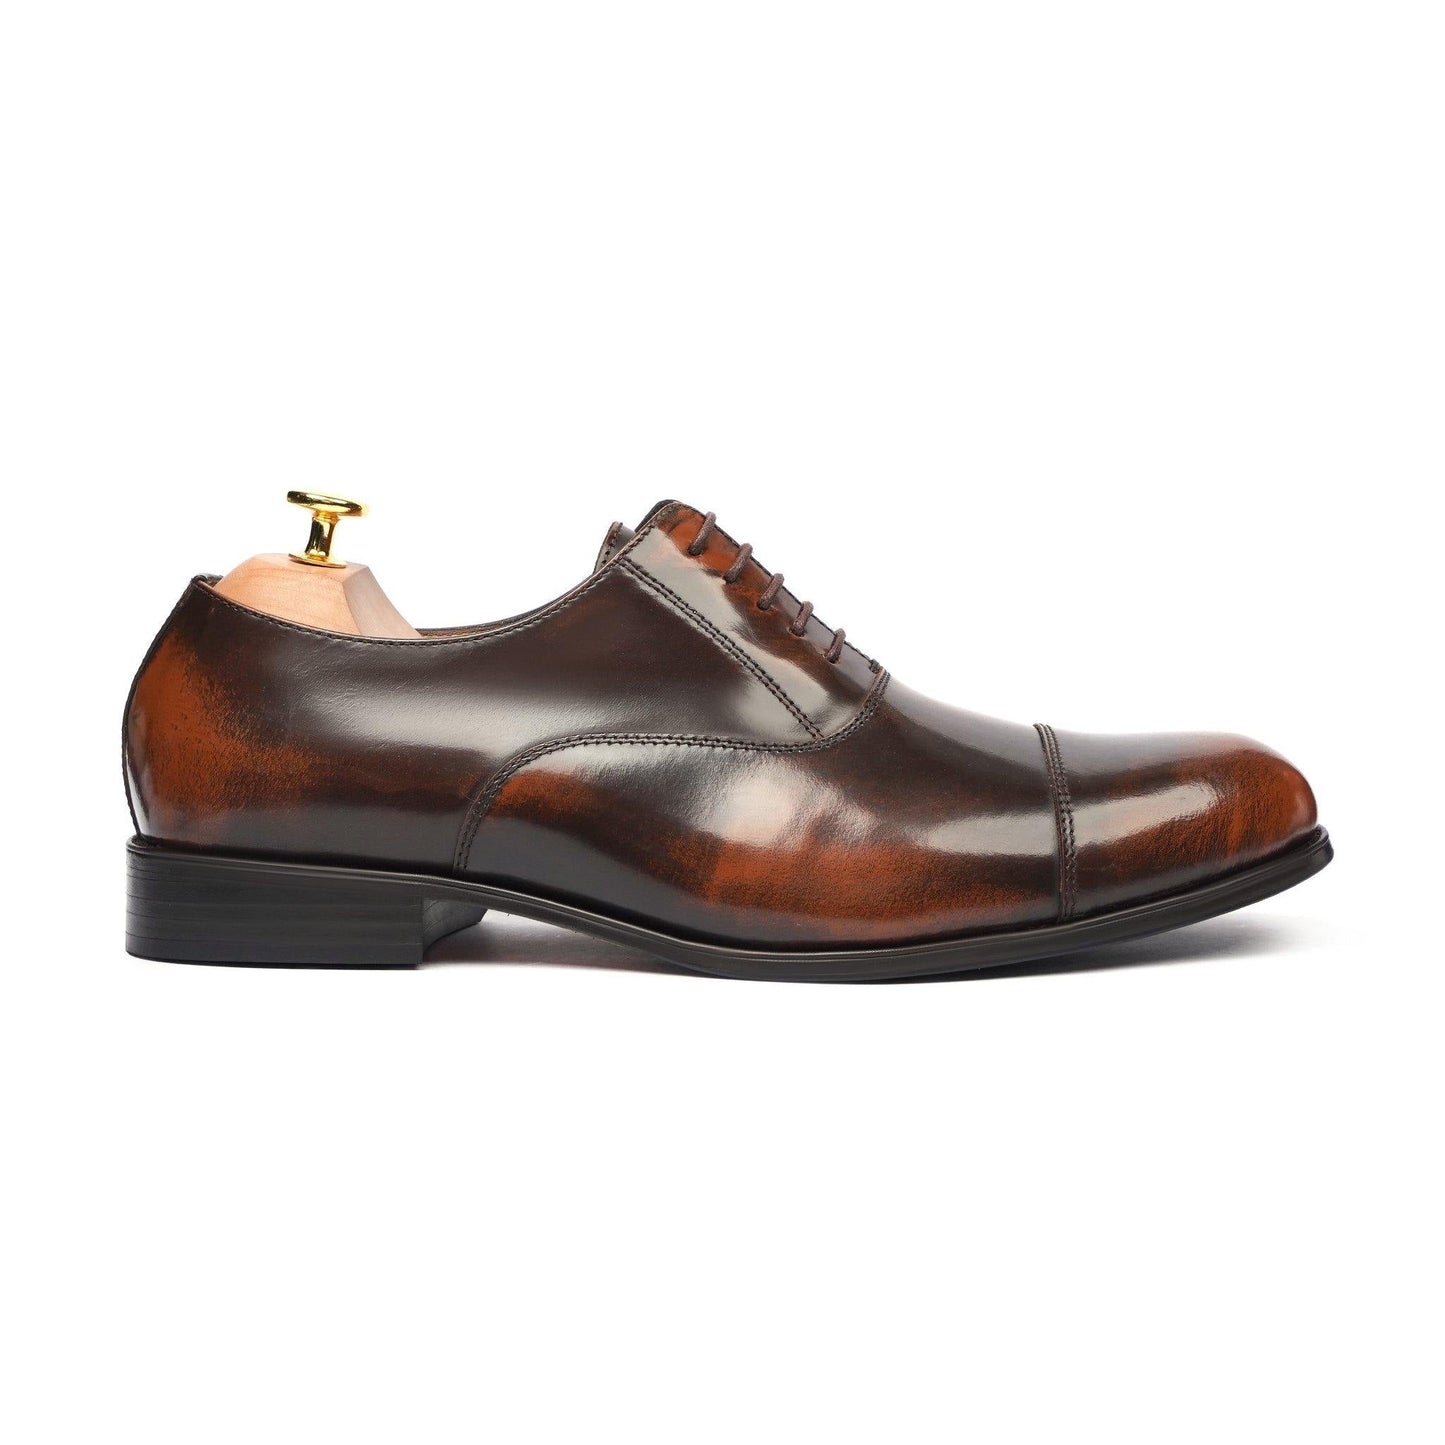 Men's Leather Oxford Shoes Leather Boots, Men's Leather Oxford Shoes